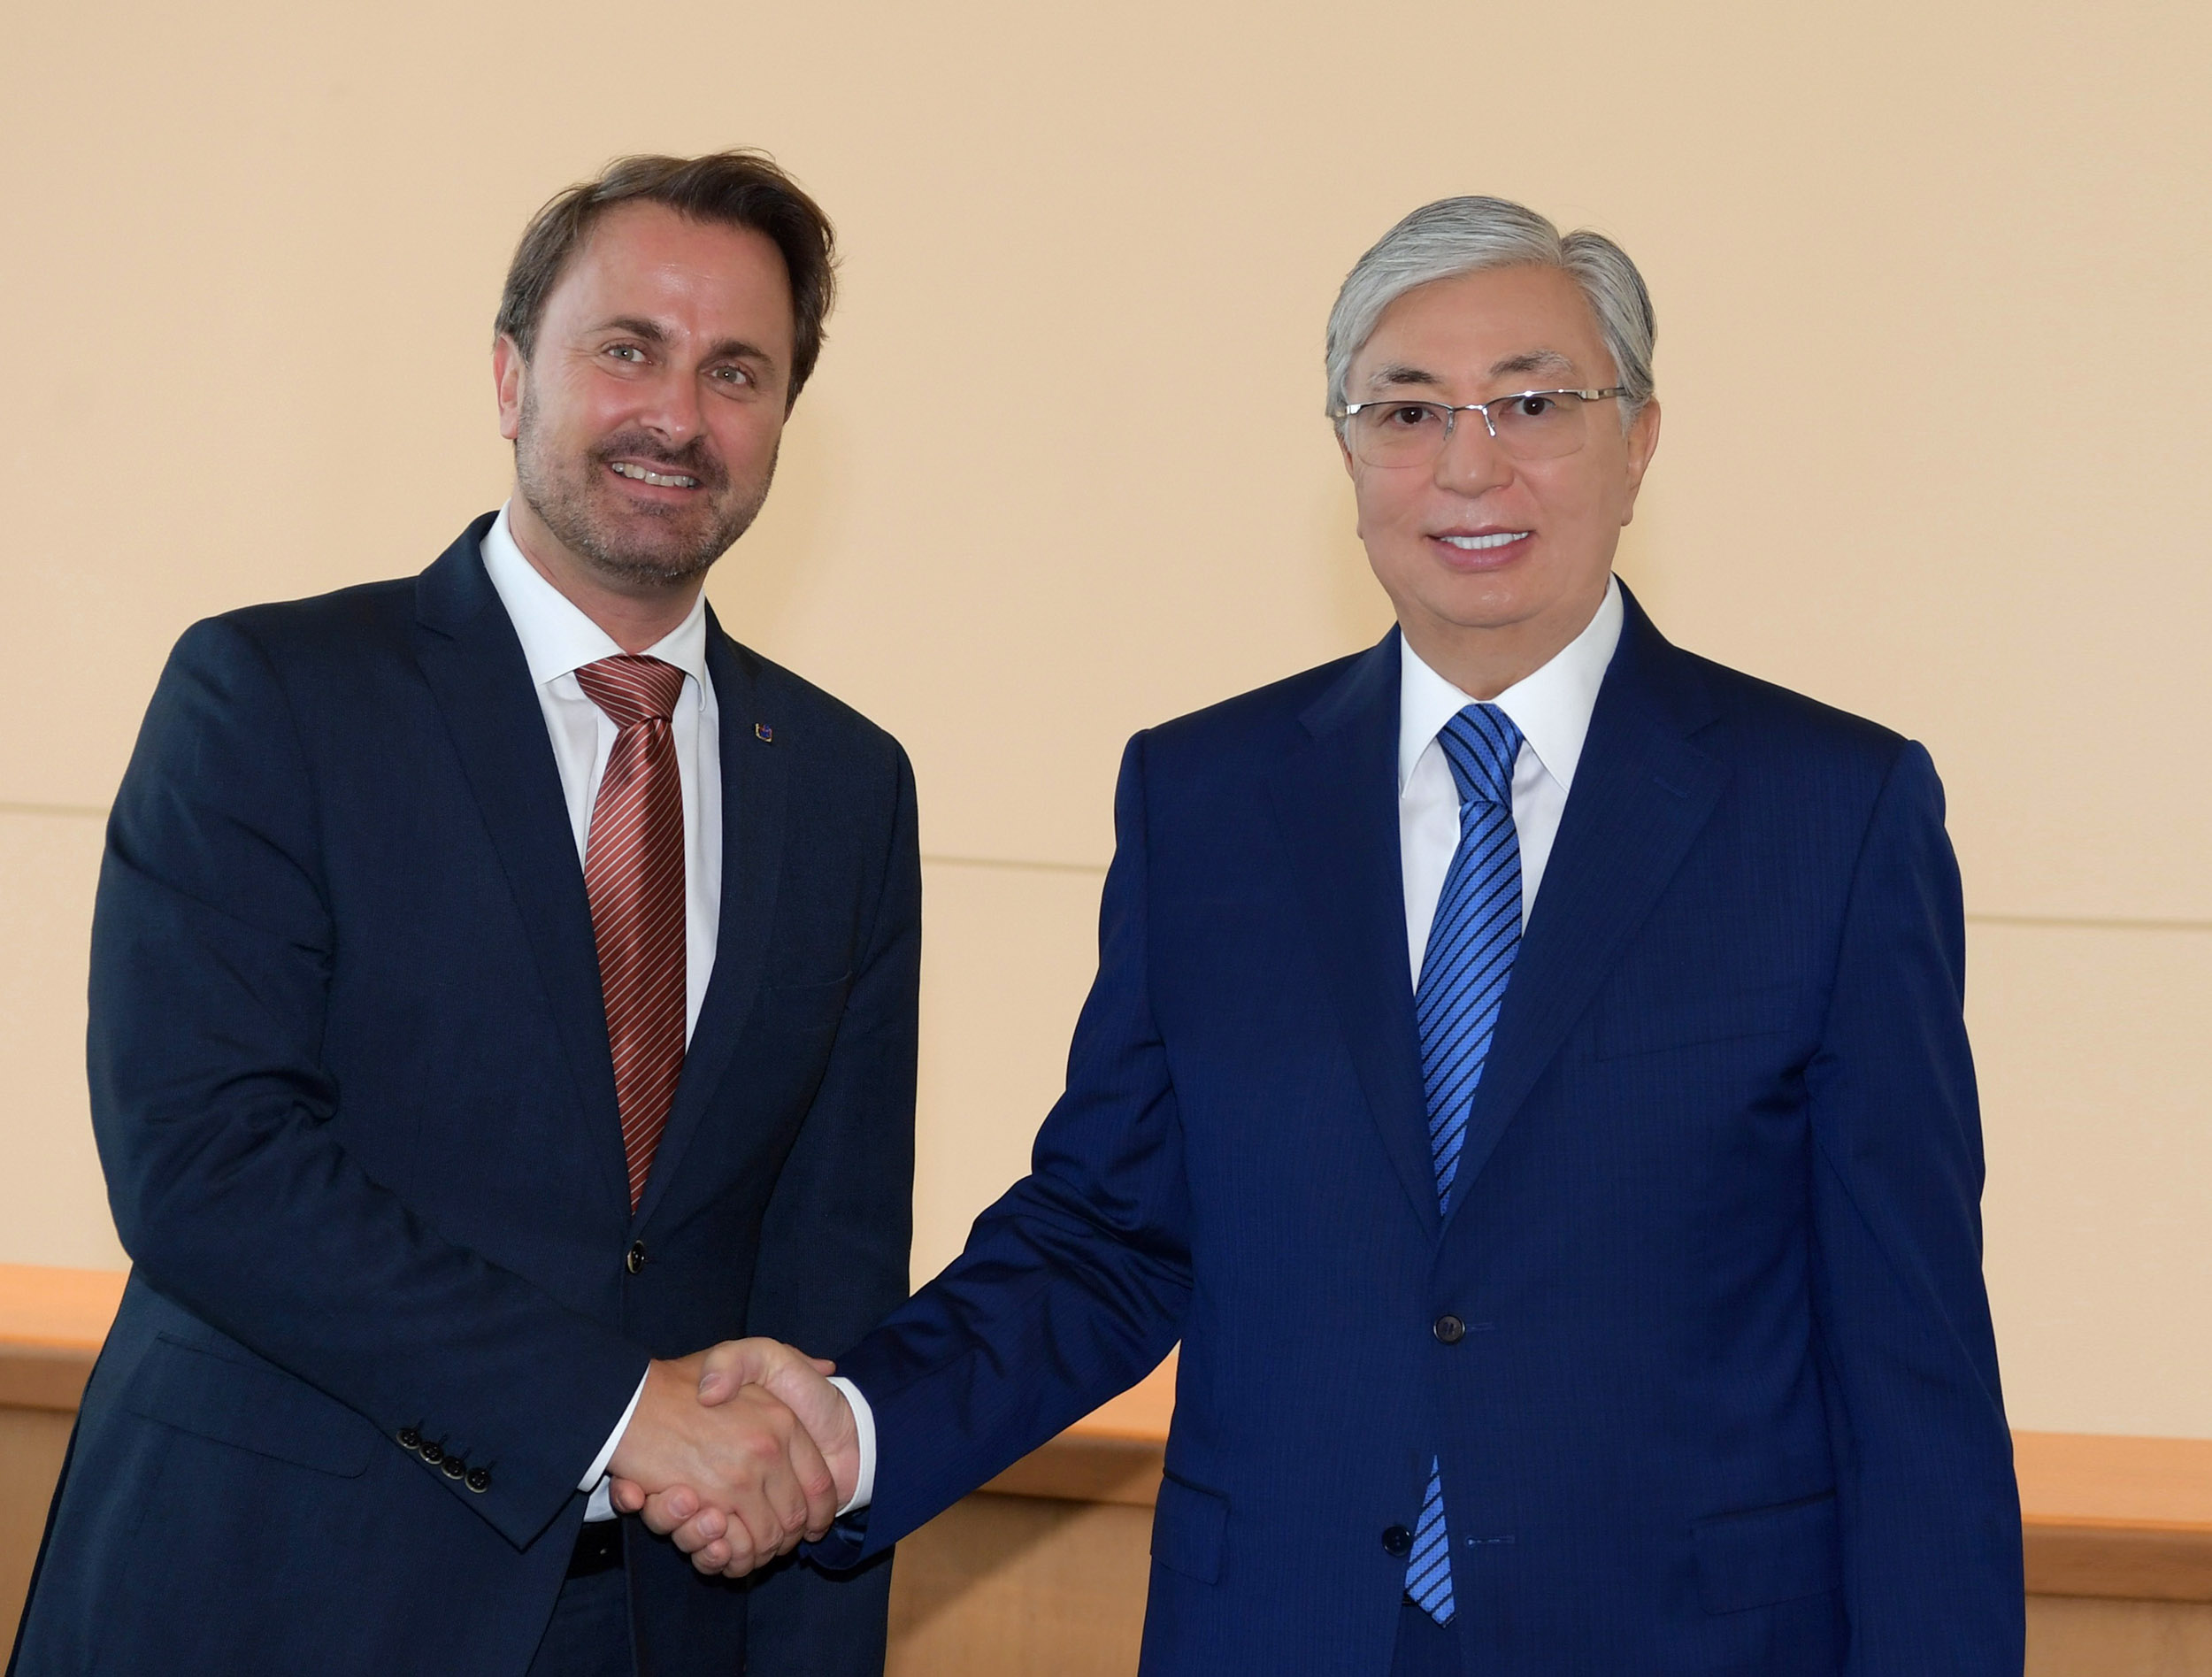 Head of state meets with Prime Minister of Luxembourg Xavier Bettel